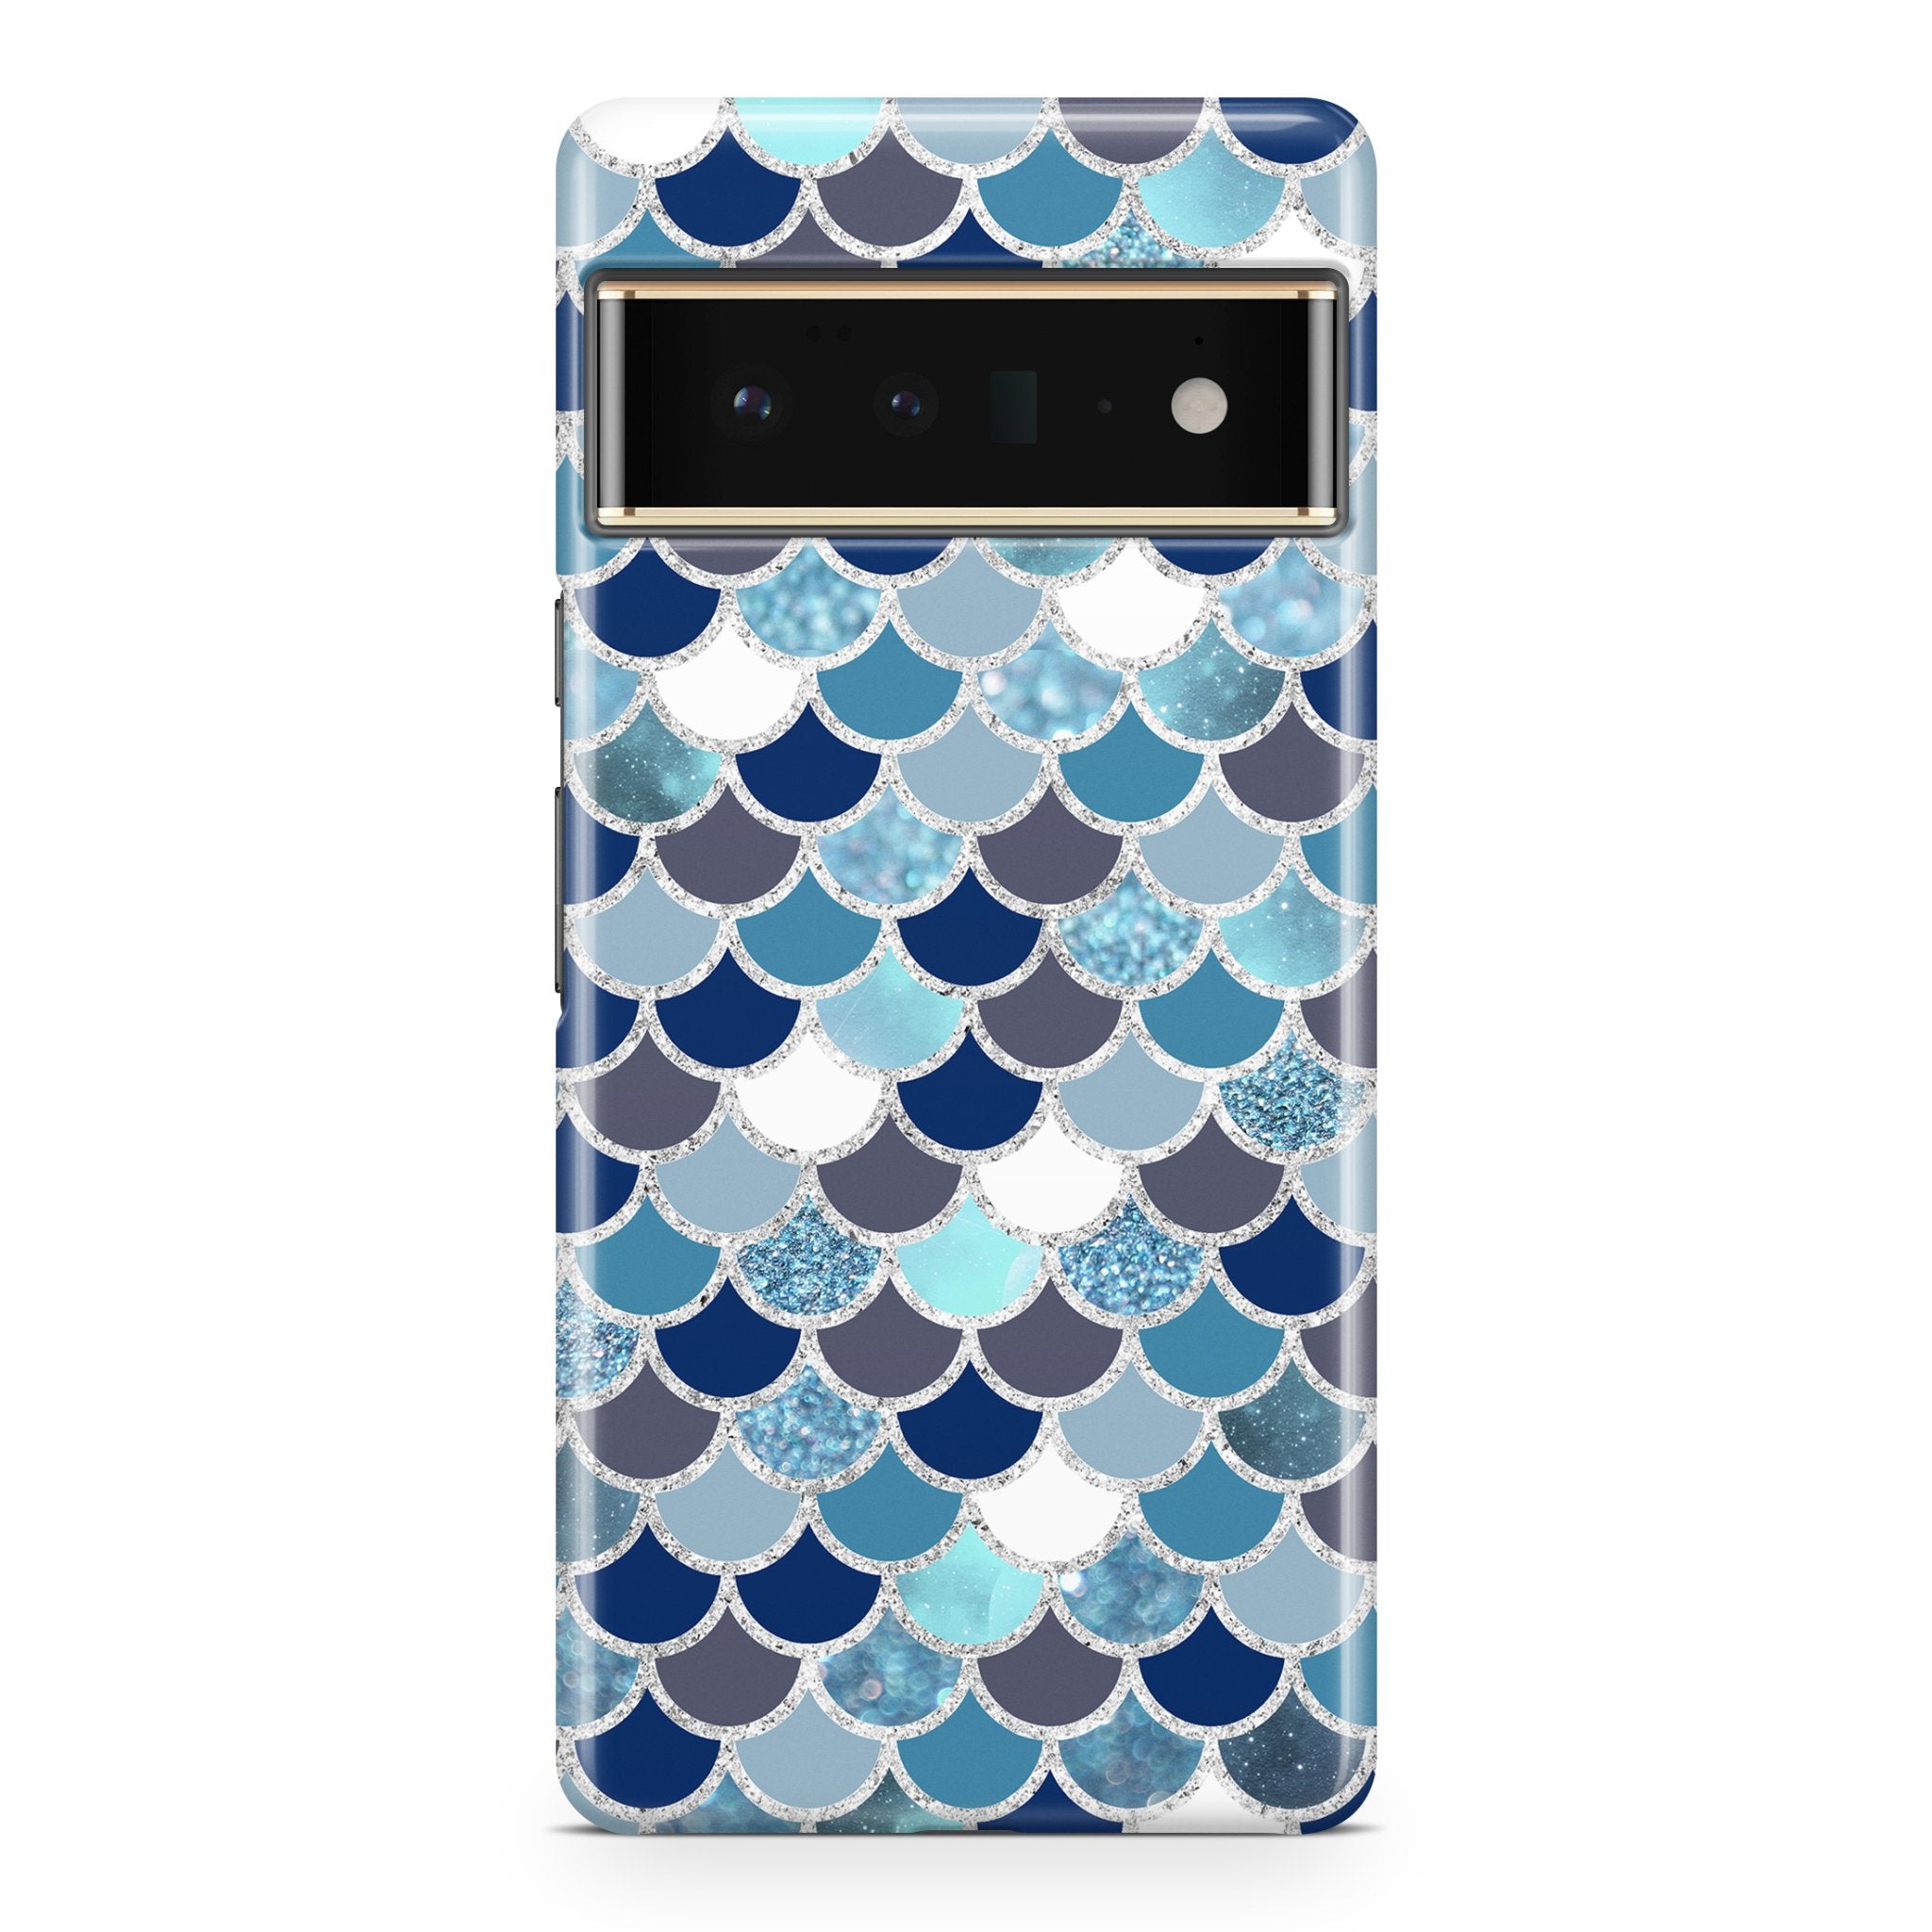 Blue & White Mermaid Scale - Google phone case designs by CaseSwagger